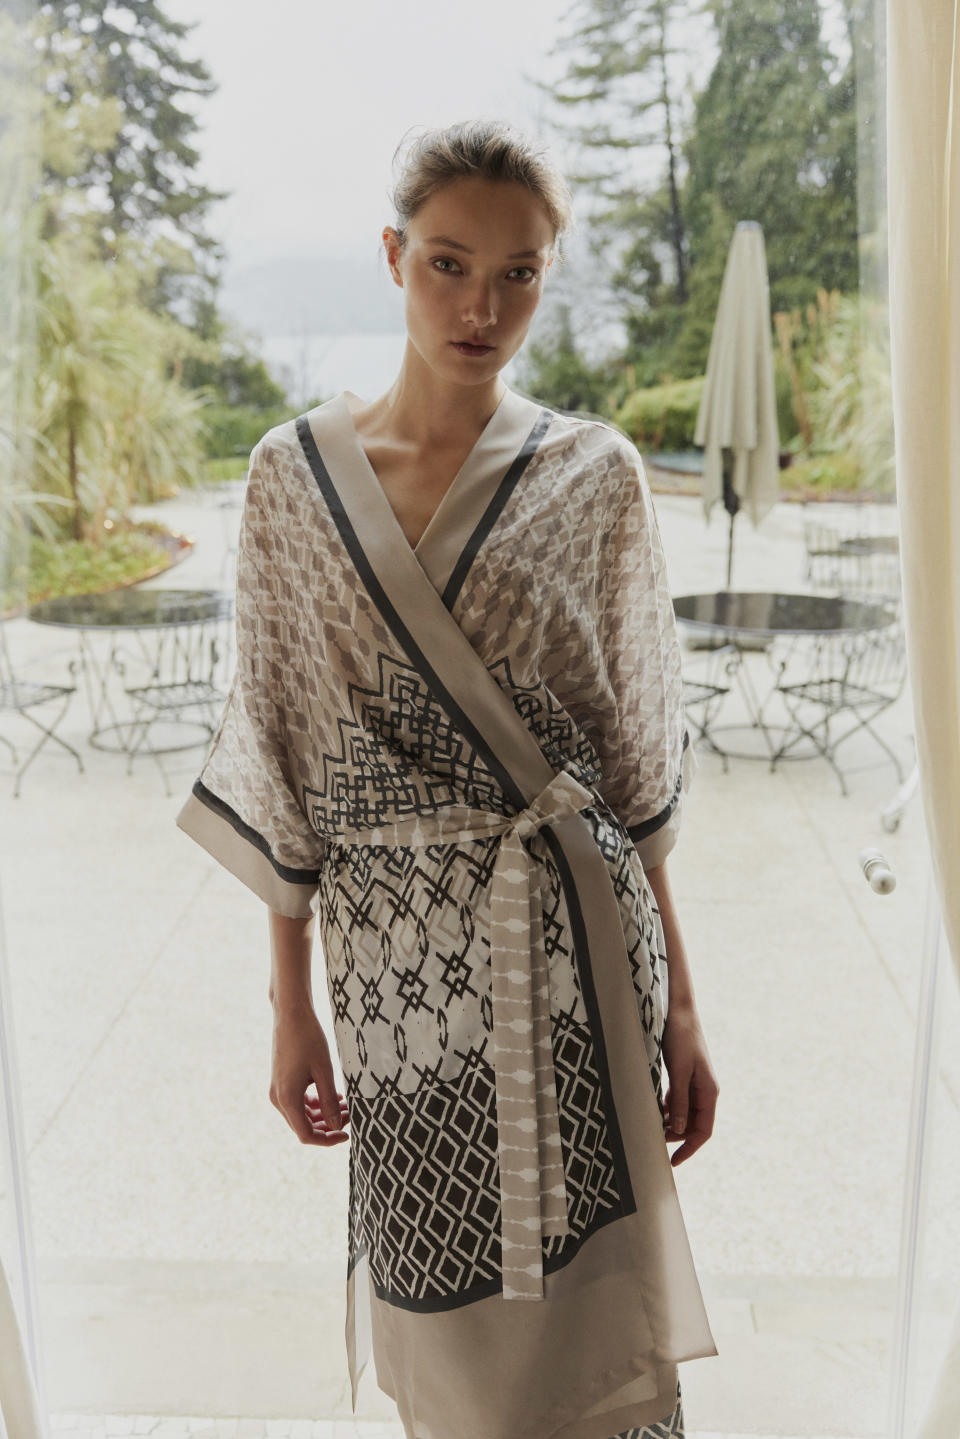 A look from the Brunello Cucinelli capsule for Mytheresa.